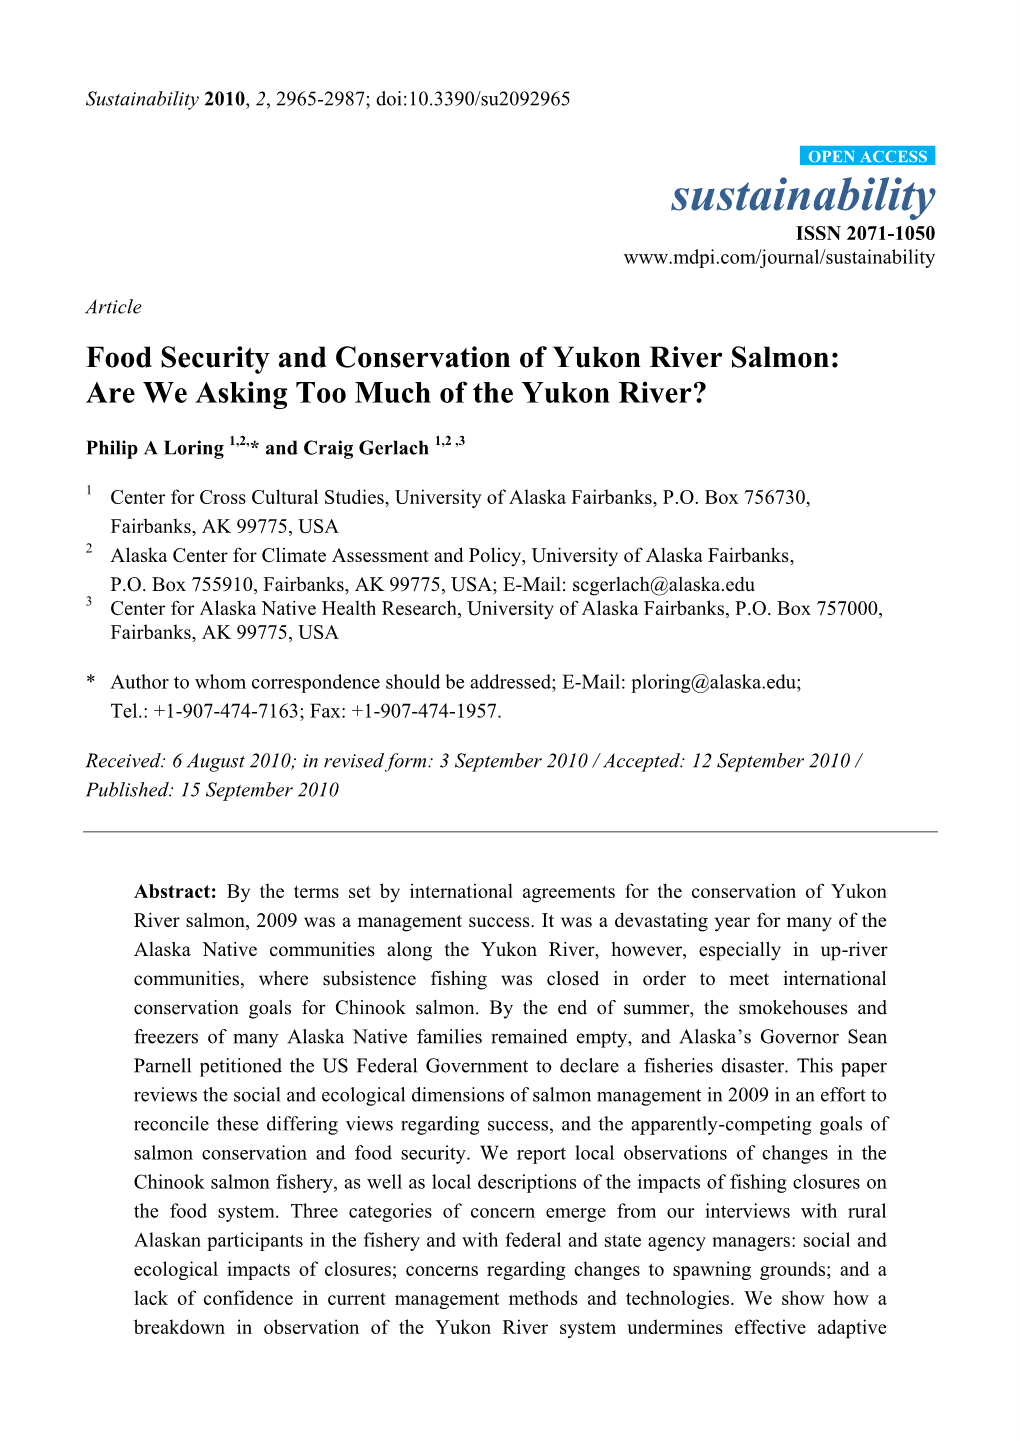 Food Security and Conservation of Yukon River Salmon: Are We Asking Too Much of the Yukon River?